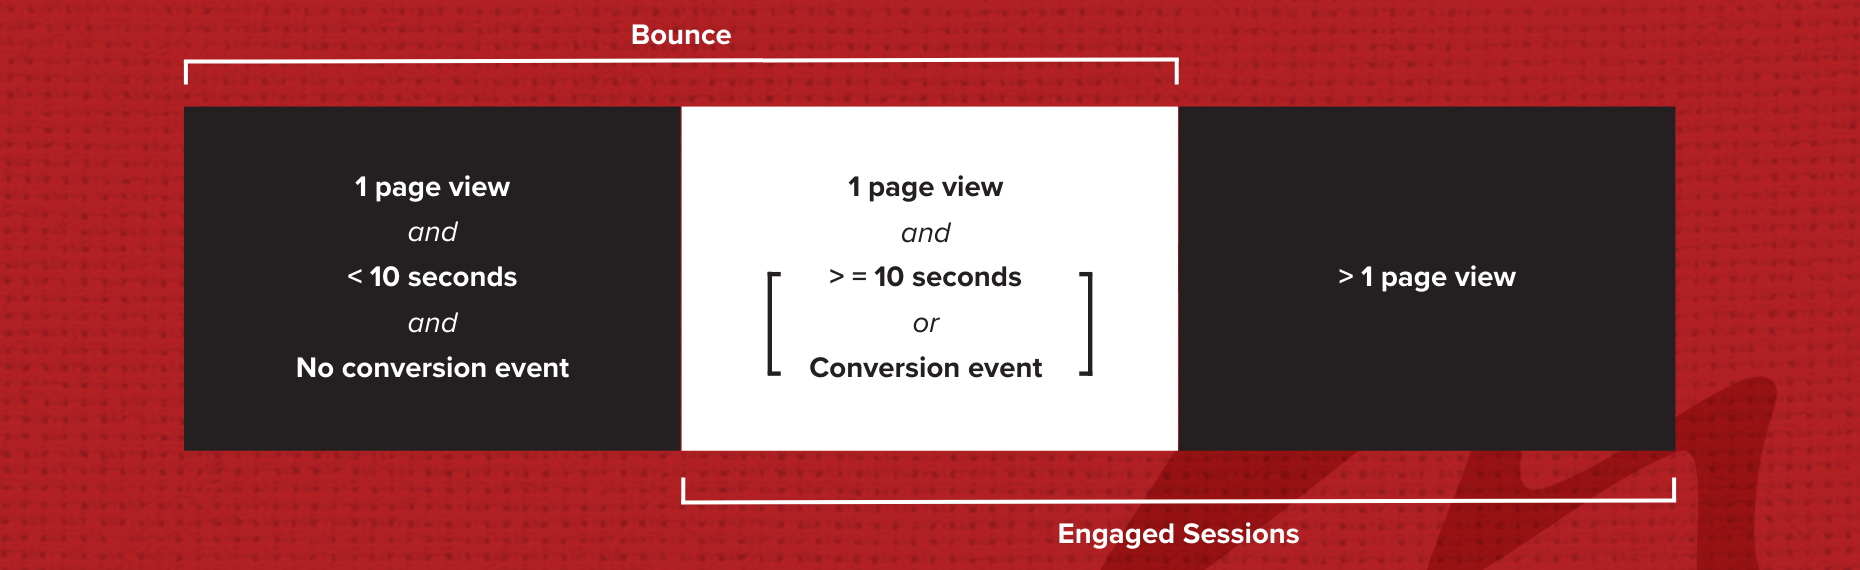 bounce vs engaged session